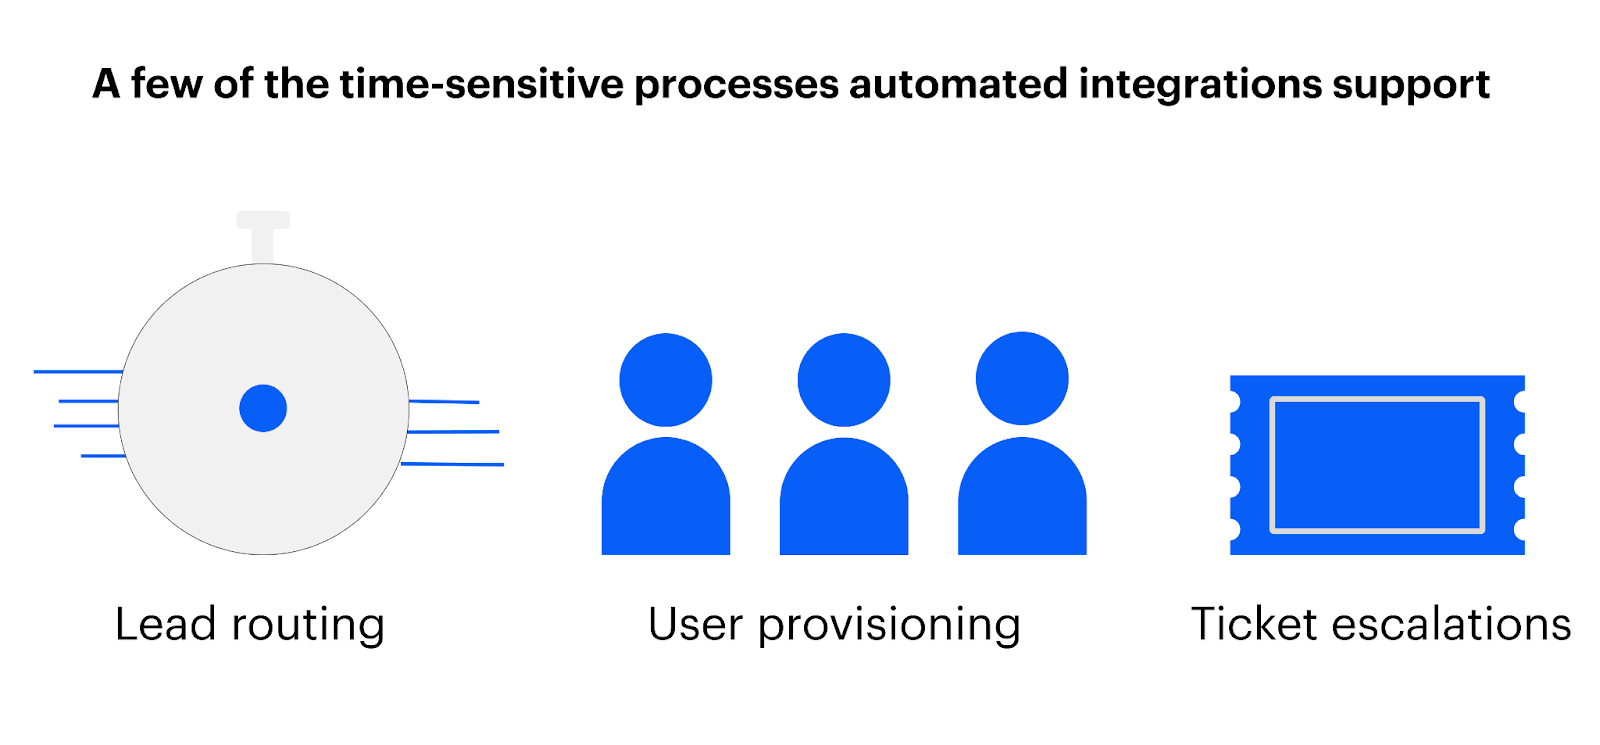 A visual of some of the processes that automated integrations support